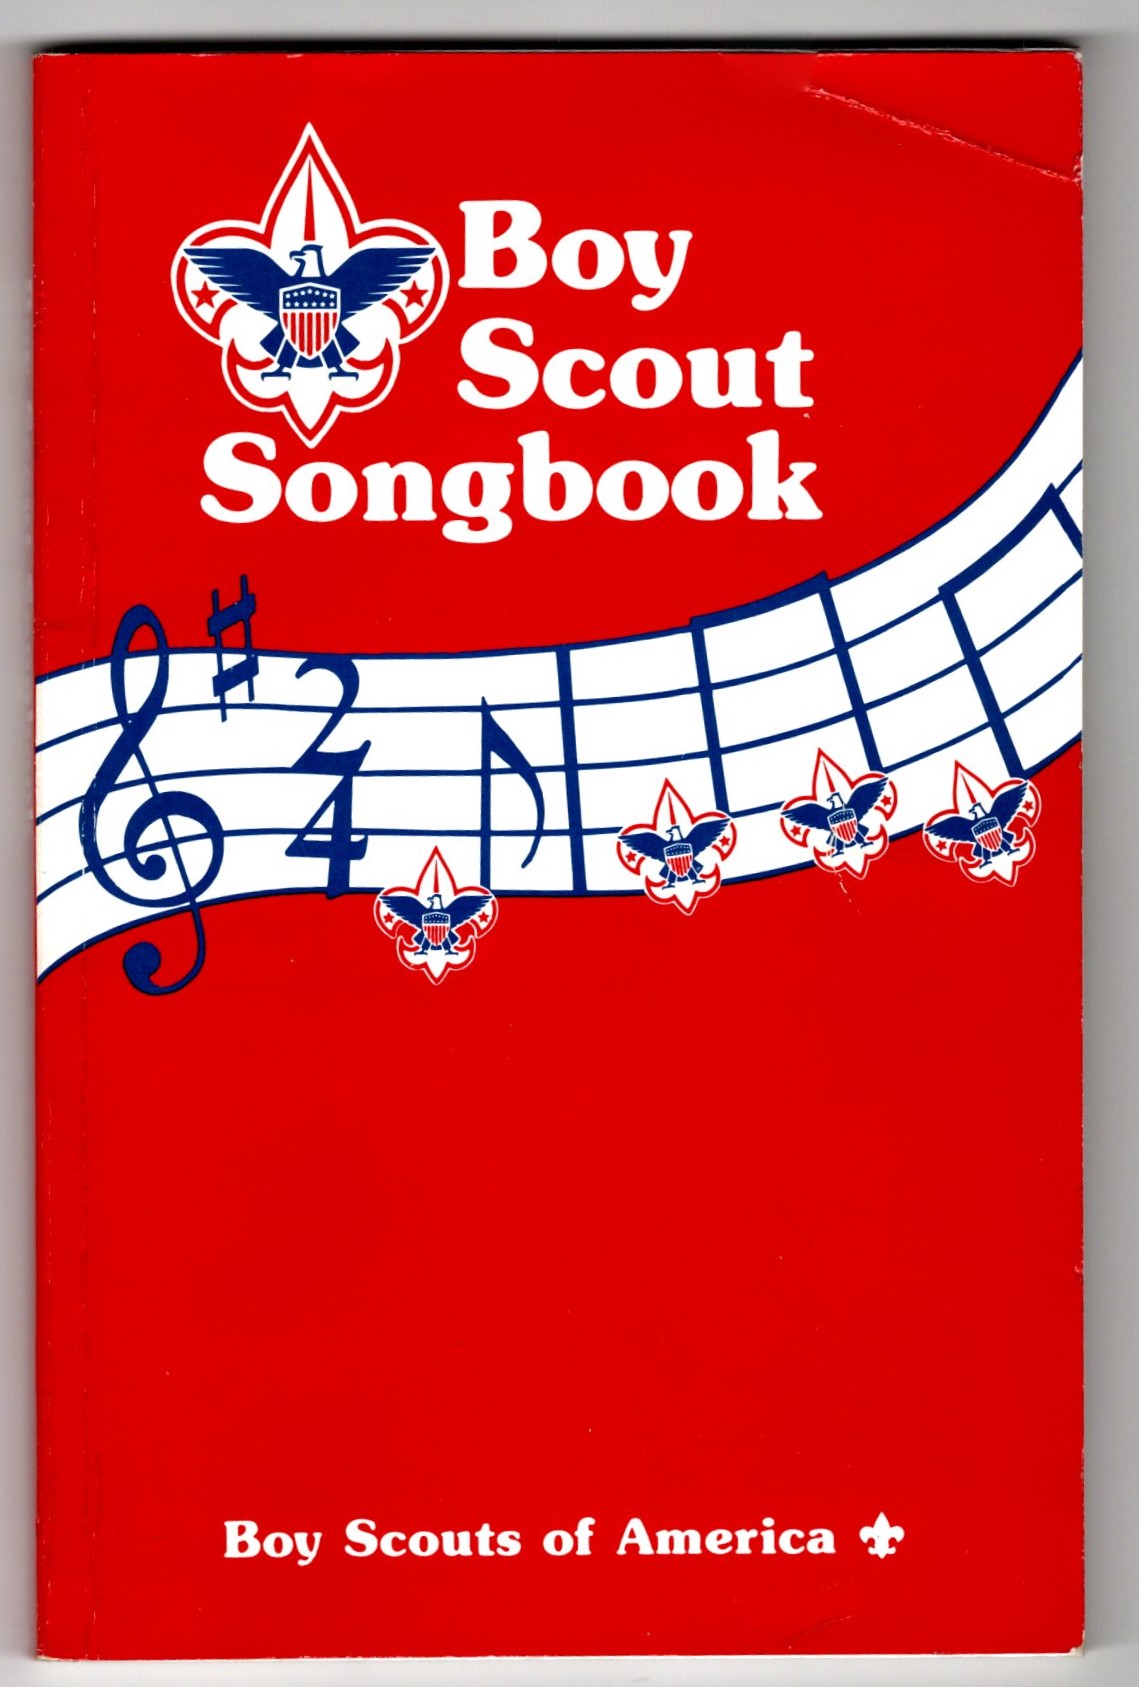 boy-scout-songbook-1956-edition